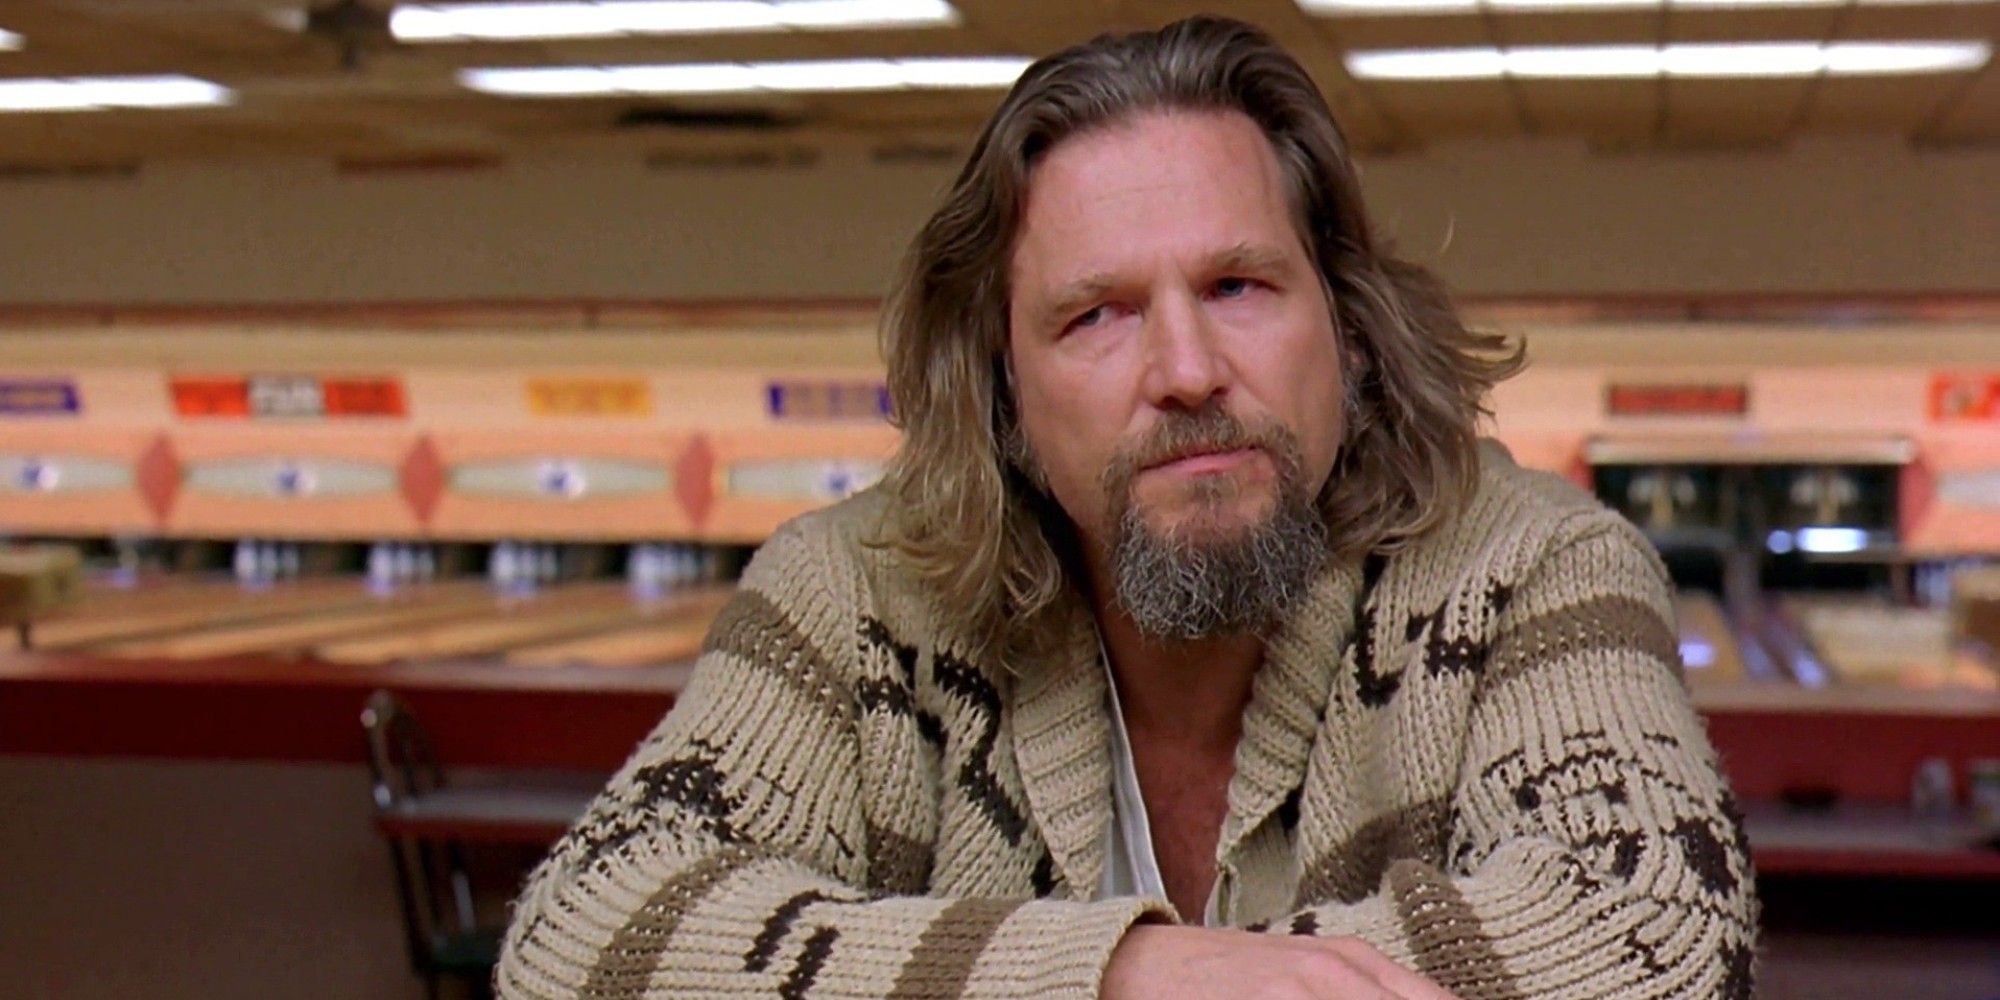 The Dude looking stern at the bowling alley bar in The Big Lebowski